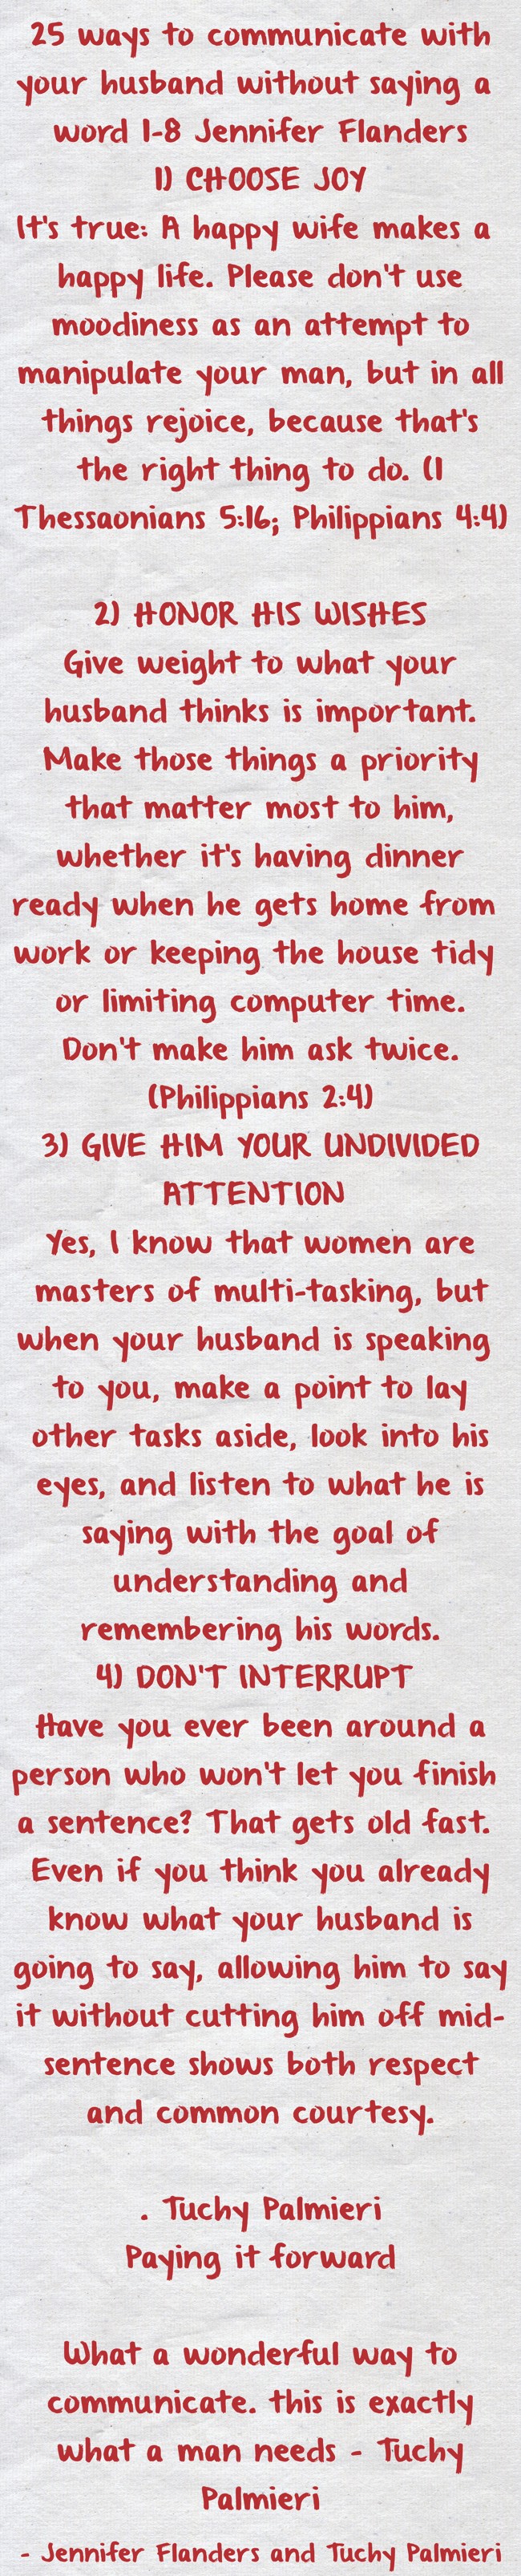 Give her attention or someone else will.. - Quozio